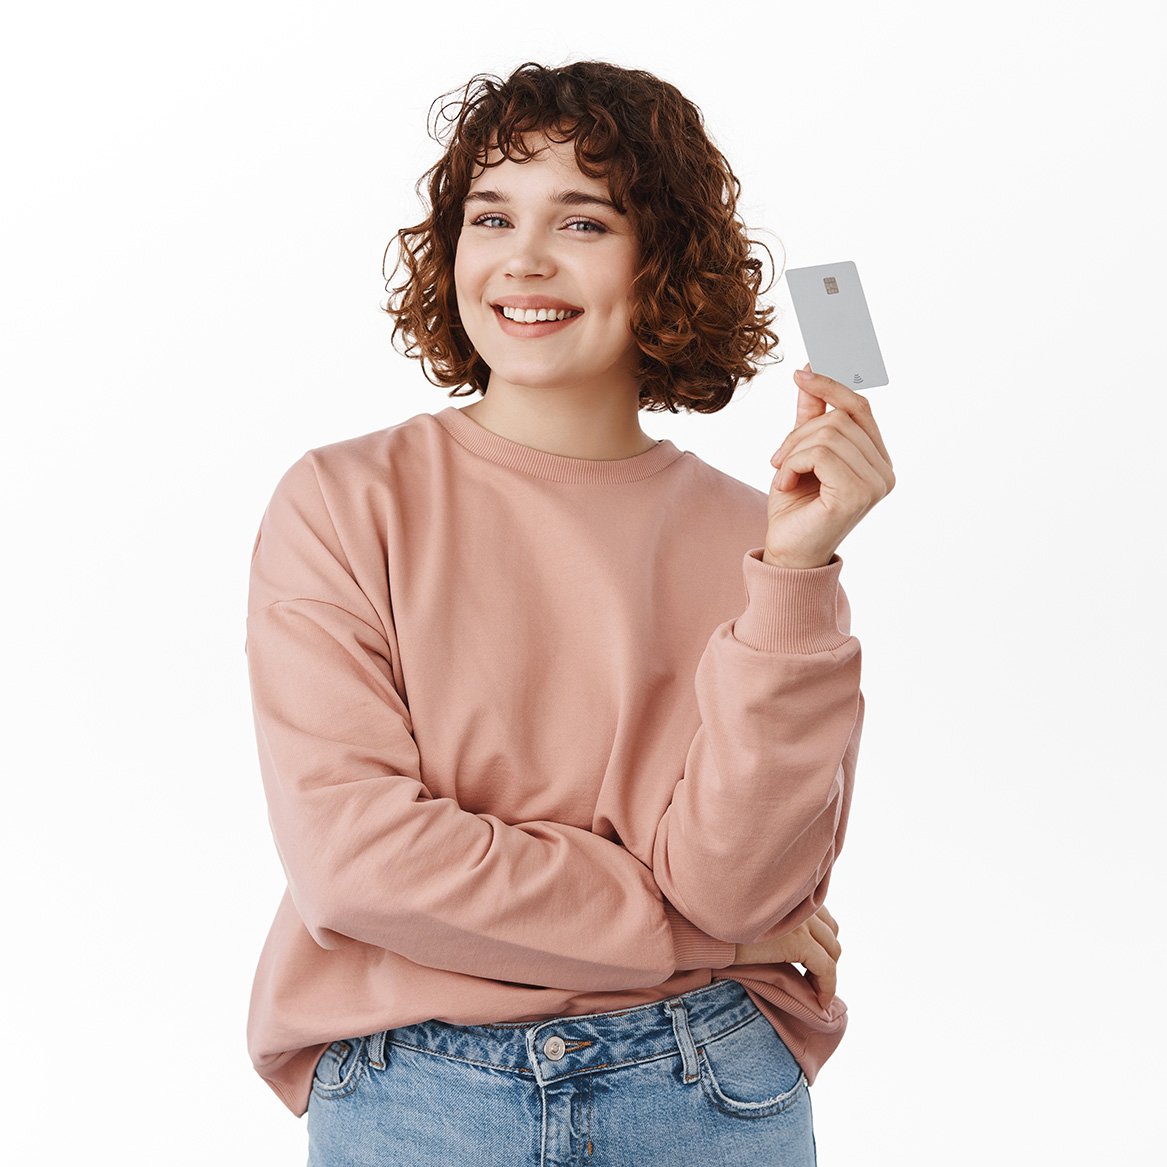 bank-finance-concept-confident-satisfied-young-woman-shows-credit-card-smiles-happy-pleased-paying-contactless-going-shopping-standing-white-background